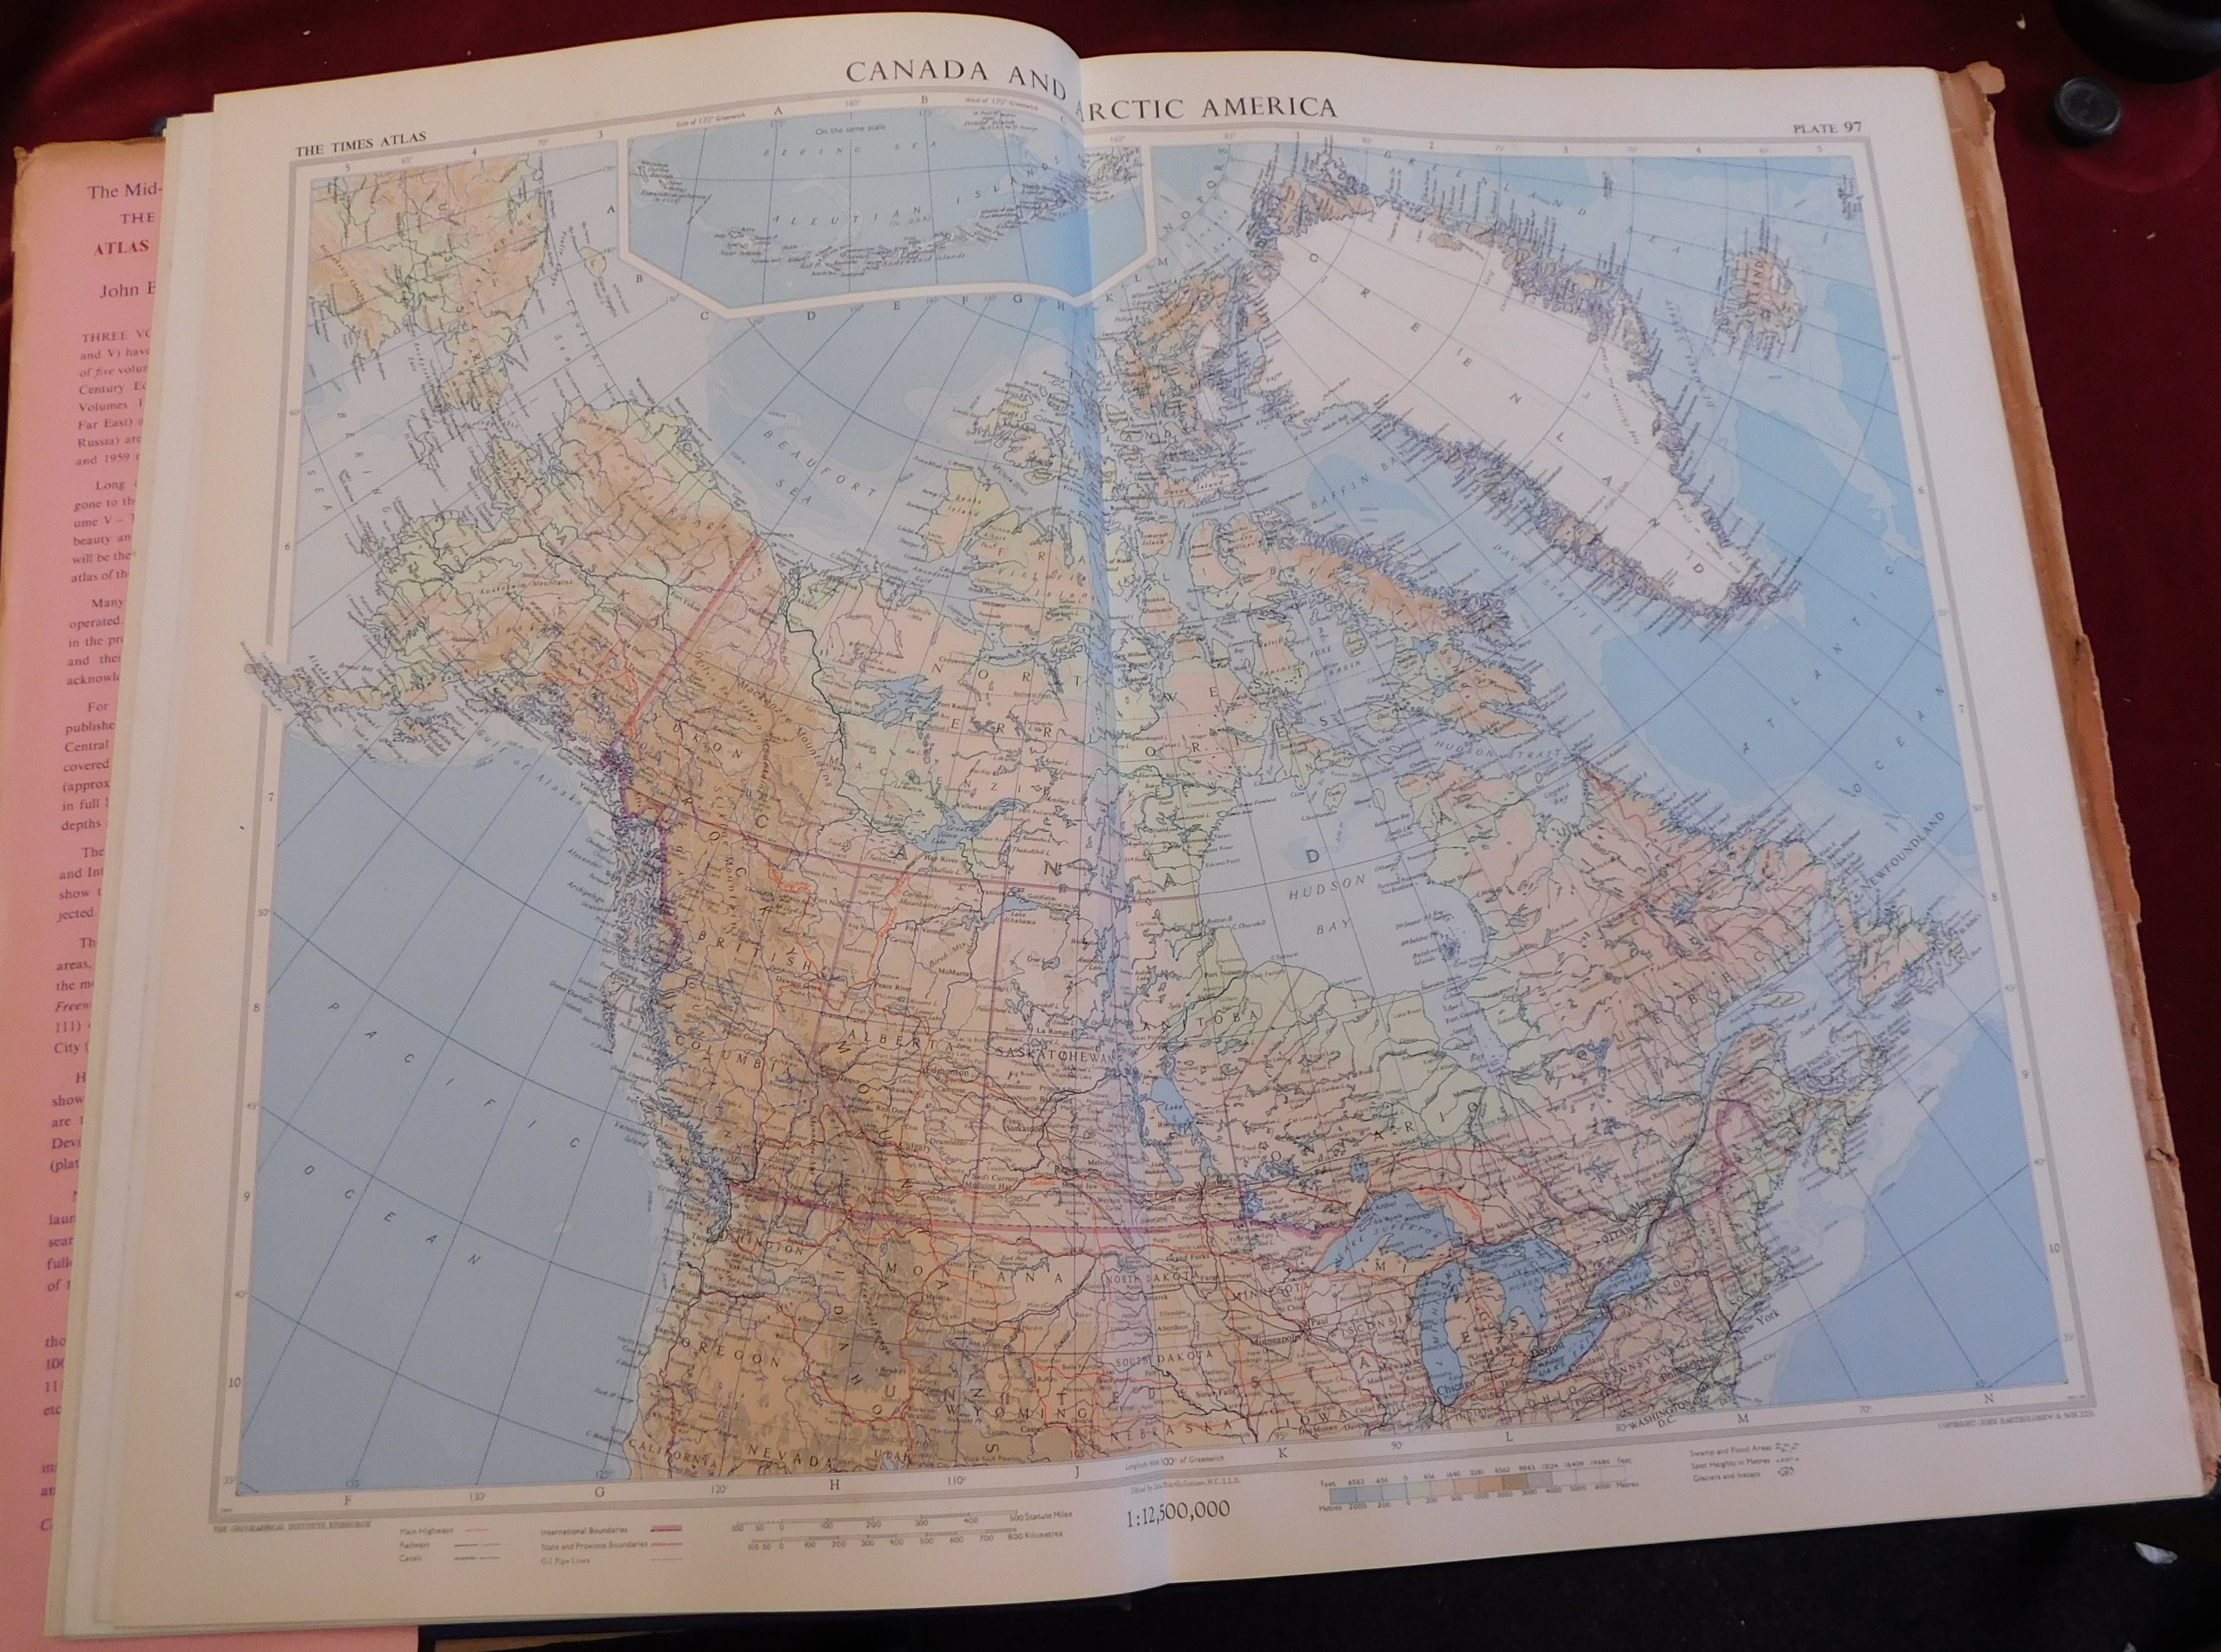 The Times Atlas of the World Volume V, 1955 depicting The Americas. Good condition with some wear to - Image 3 of 3